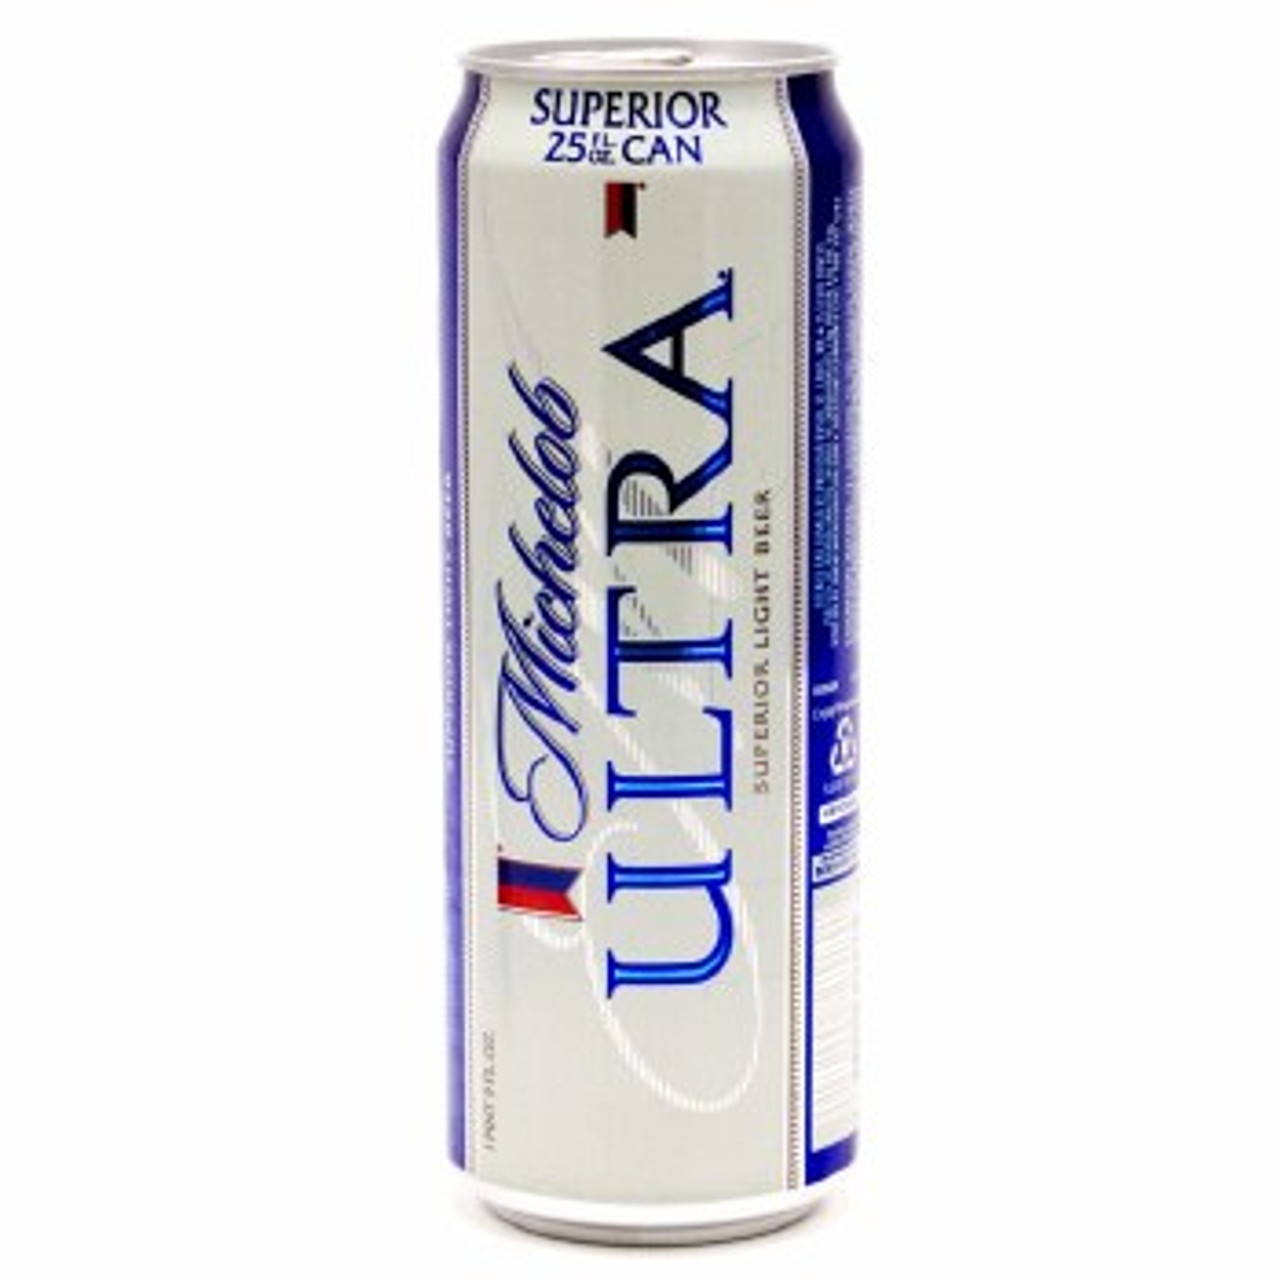 https://cdn11.bigcommerce.com/s-jyglxsrif5/images/stencil/1280x1280/products/447/710/michelob-ultra-25oz-can__40855.1586197205.jpg?c=1